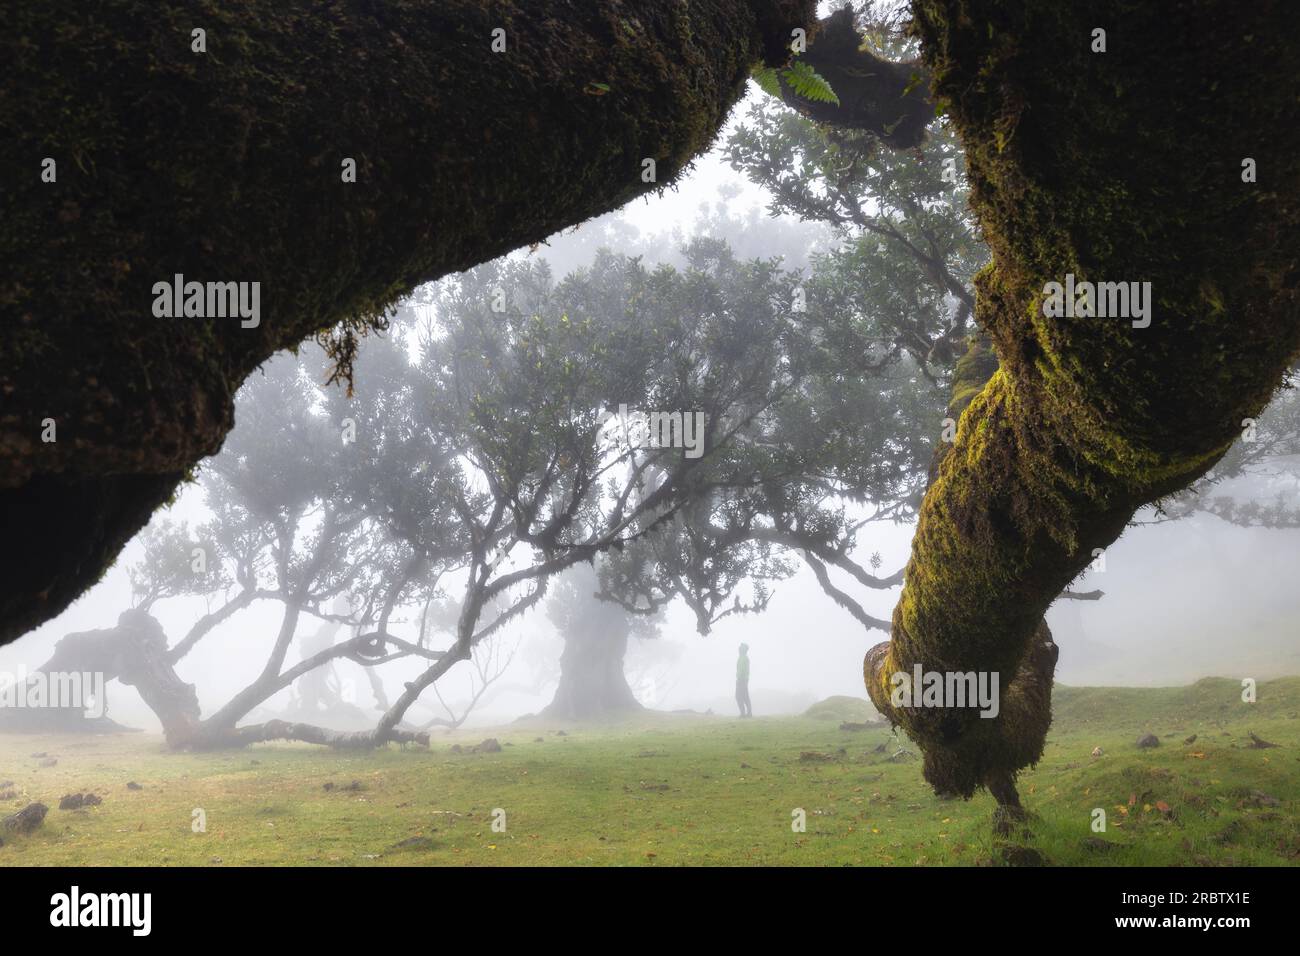 A man enjoys the beautiful view at Fanal Forest during a foggy spring day, Porto Moniz, Madeira, Portugal, Europe Stock Photo